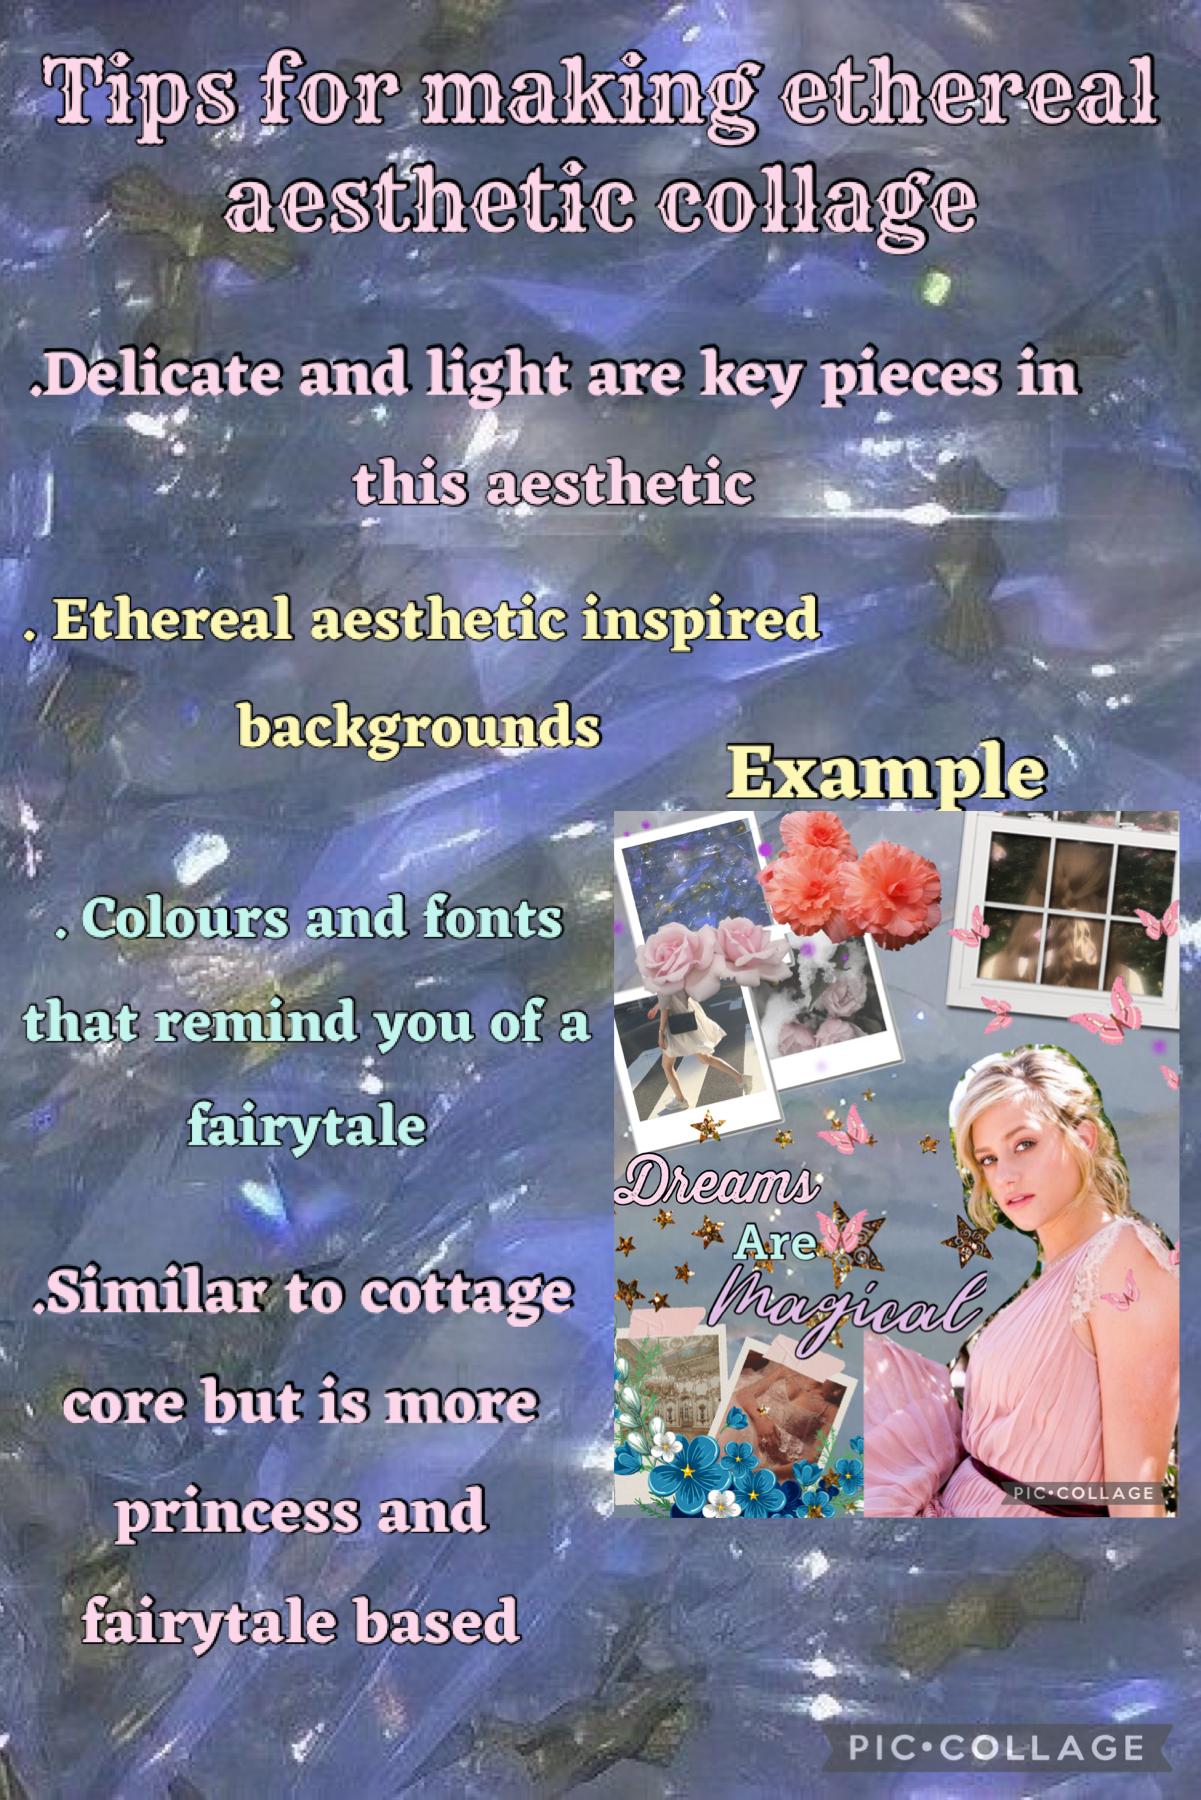 Tips for making an ethereal aesthetic collage 